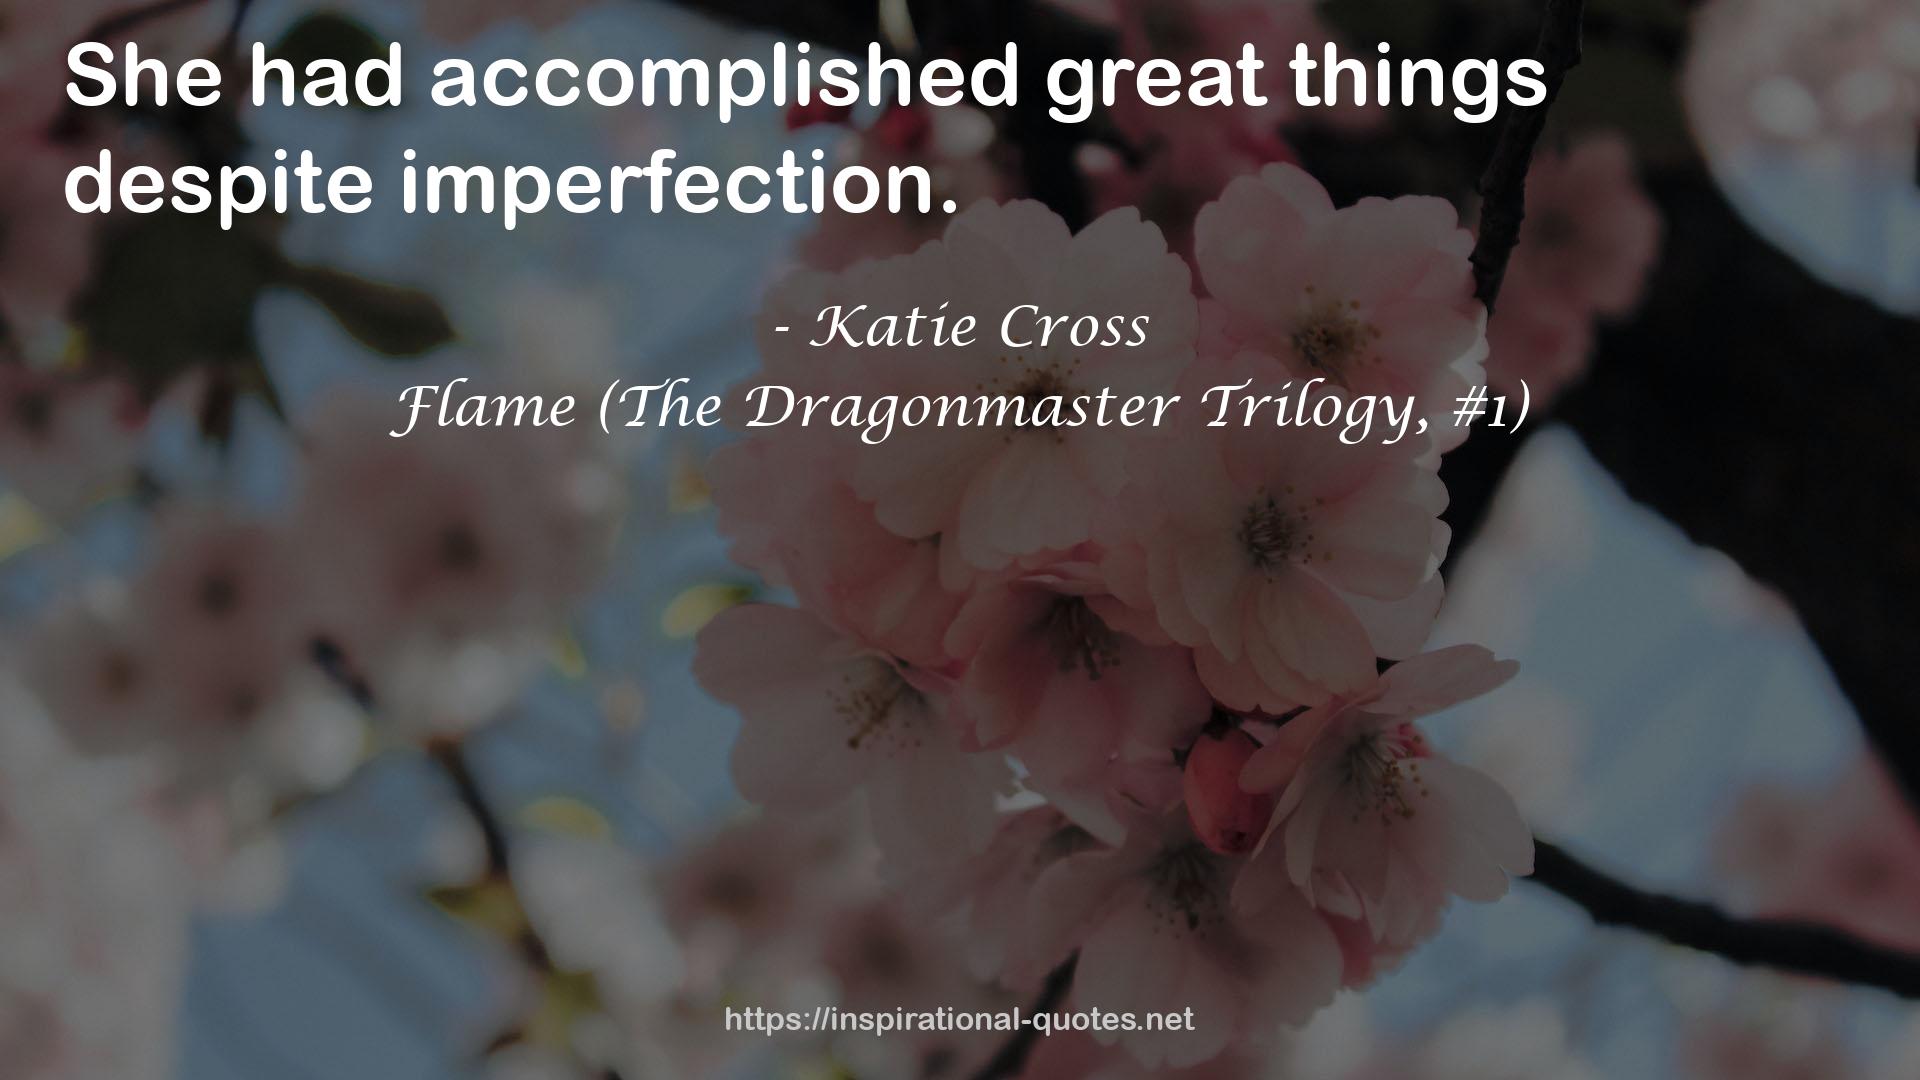 Flame (The Dragonmaster Trilogy, #1) QUOTES